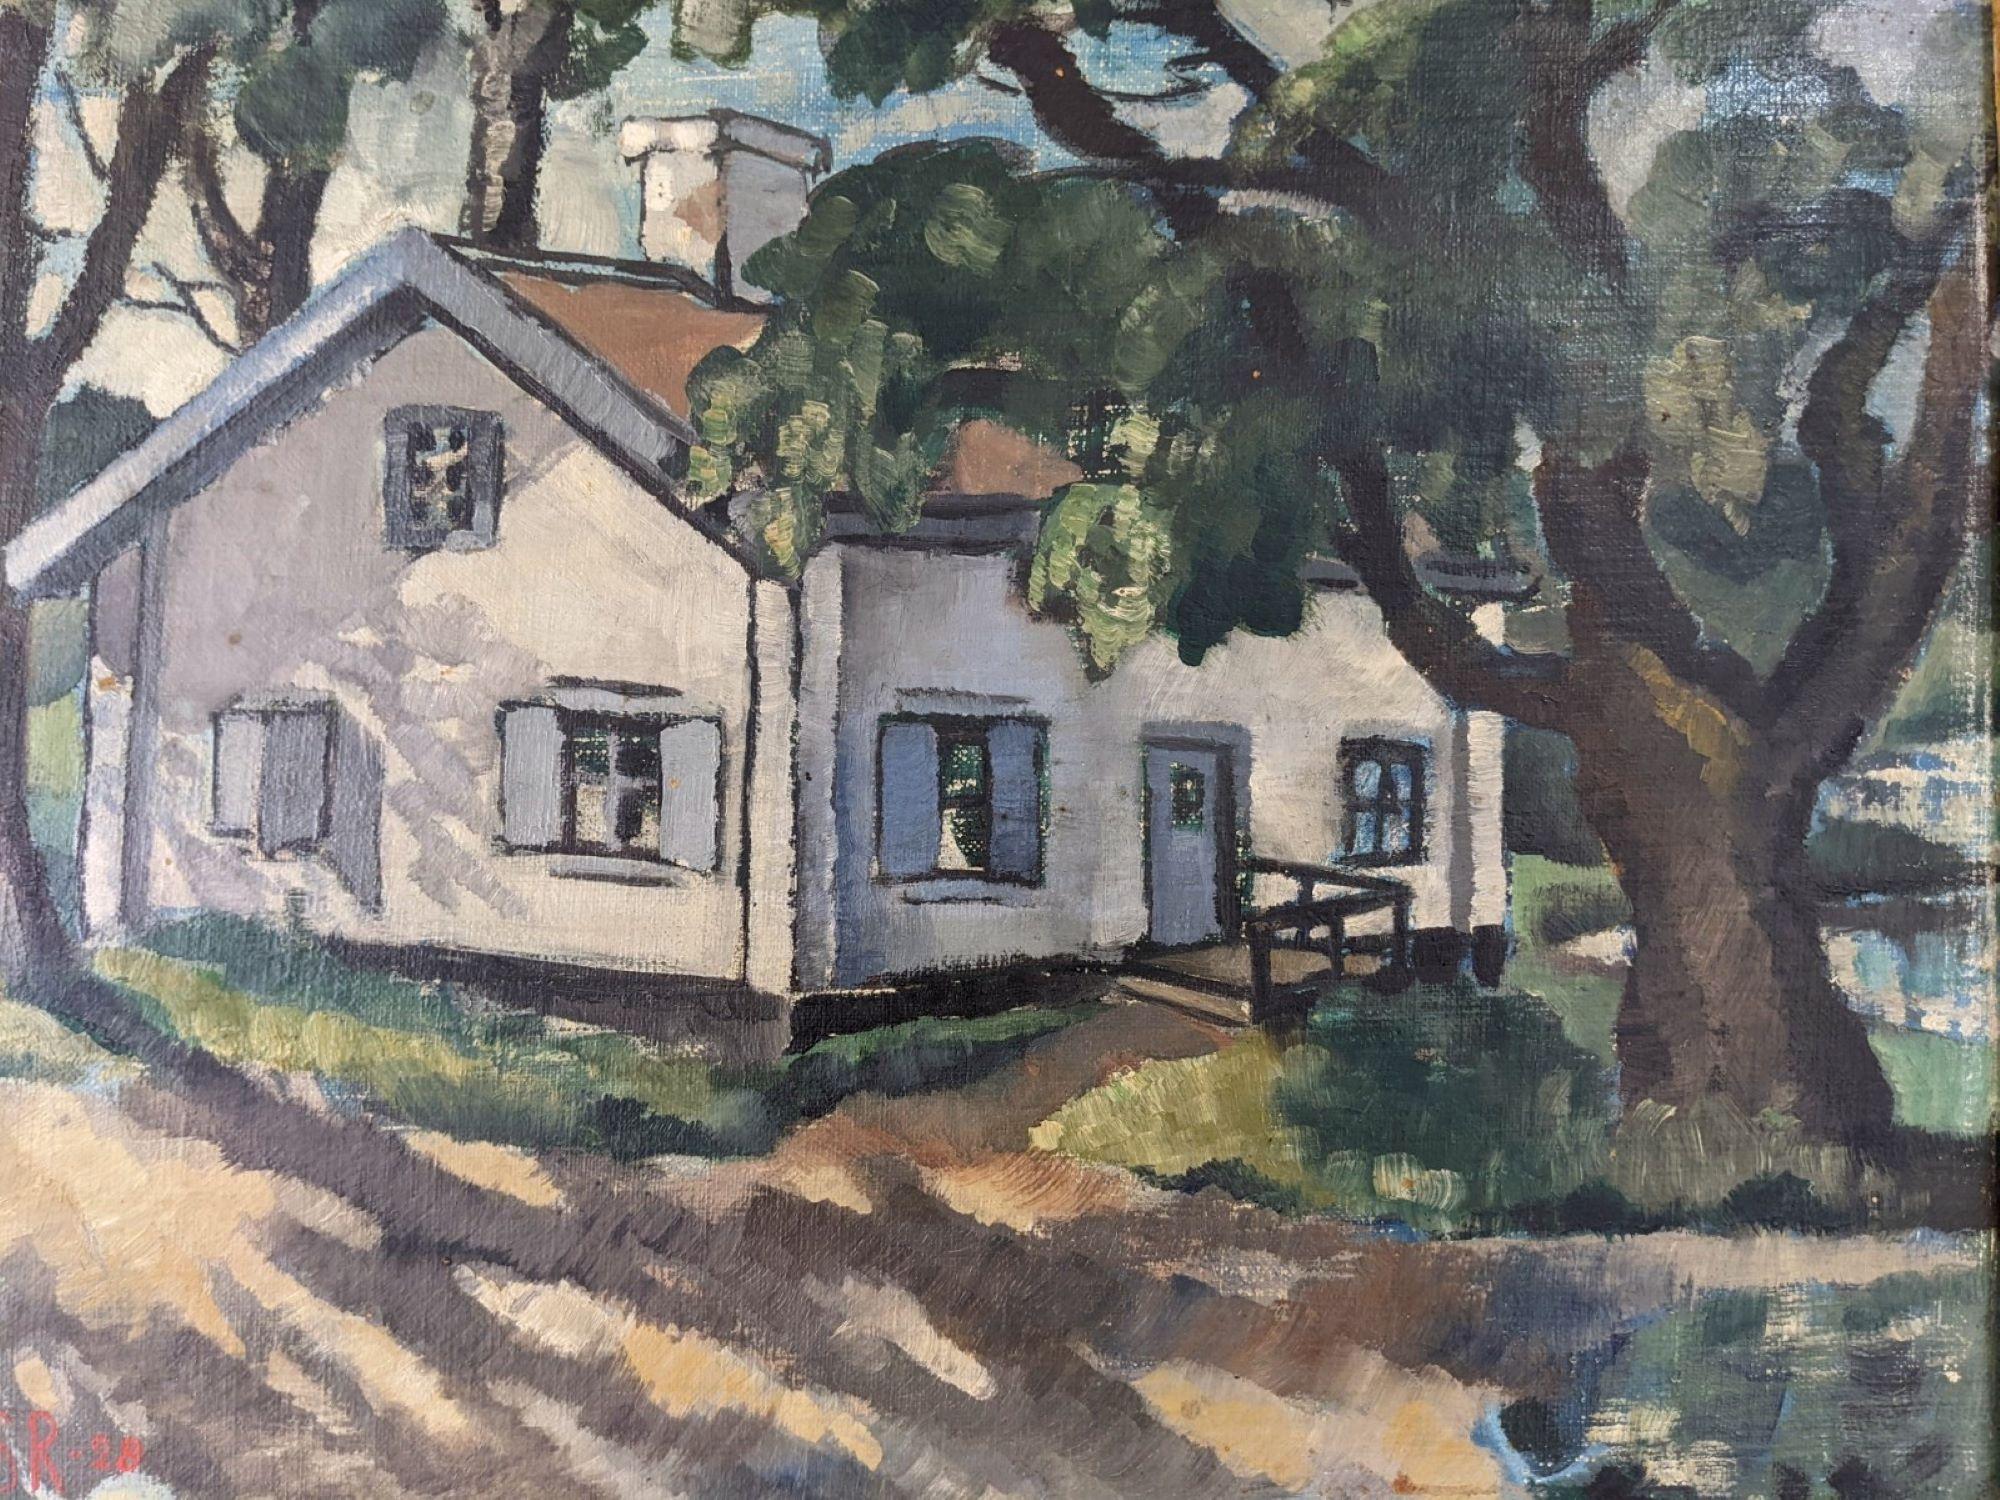 THE SHADED COTTAGE
Size: 49 x 60 cm (including frame)
Oil on canvas

An atmospheric expressionist style landscape composition in oil, painted onto canvas and dated 1928.

In this scenic view, a white cottage nests in the middle of a lush forest